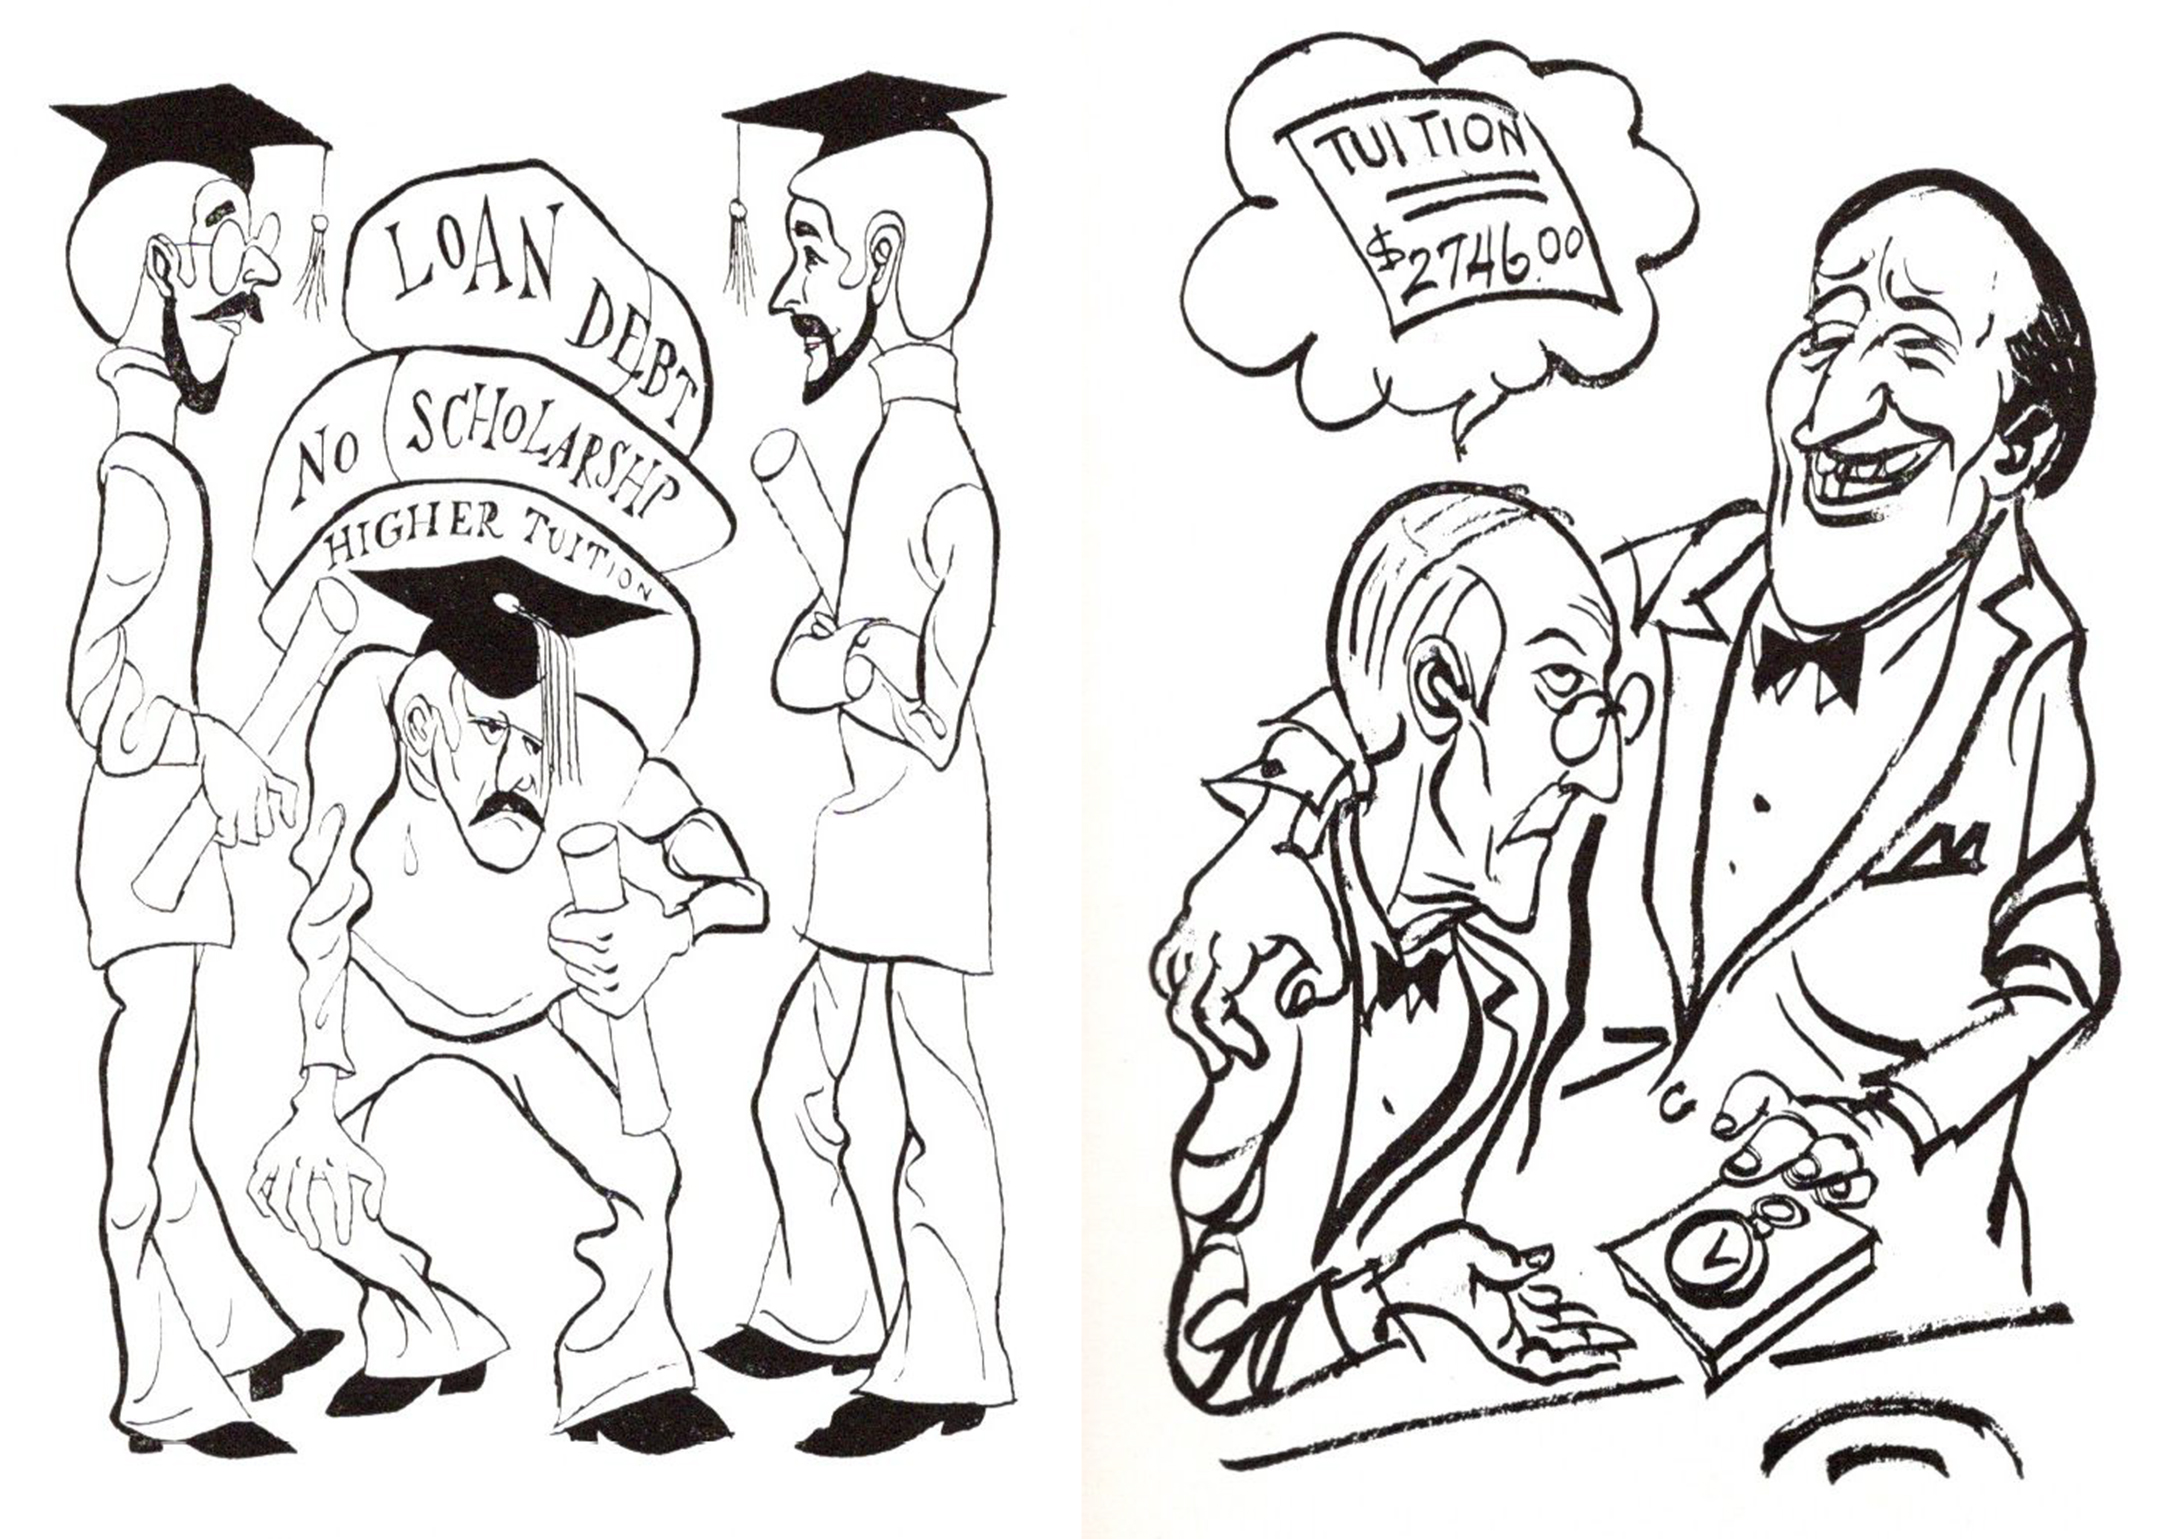 Two illustrations, at left a man crouched as bundles labeled loan debt, no scholarship, higher tuition are loaded on his back and two men look on; at left, an old man being handed a clock by a grinning younger man as the old man thinks about his tuition bill